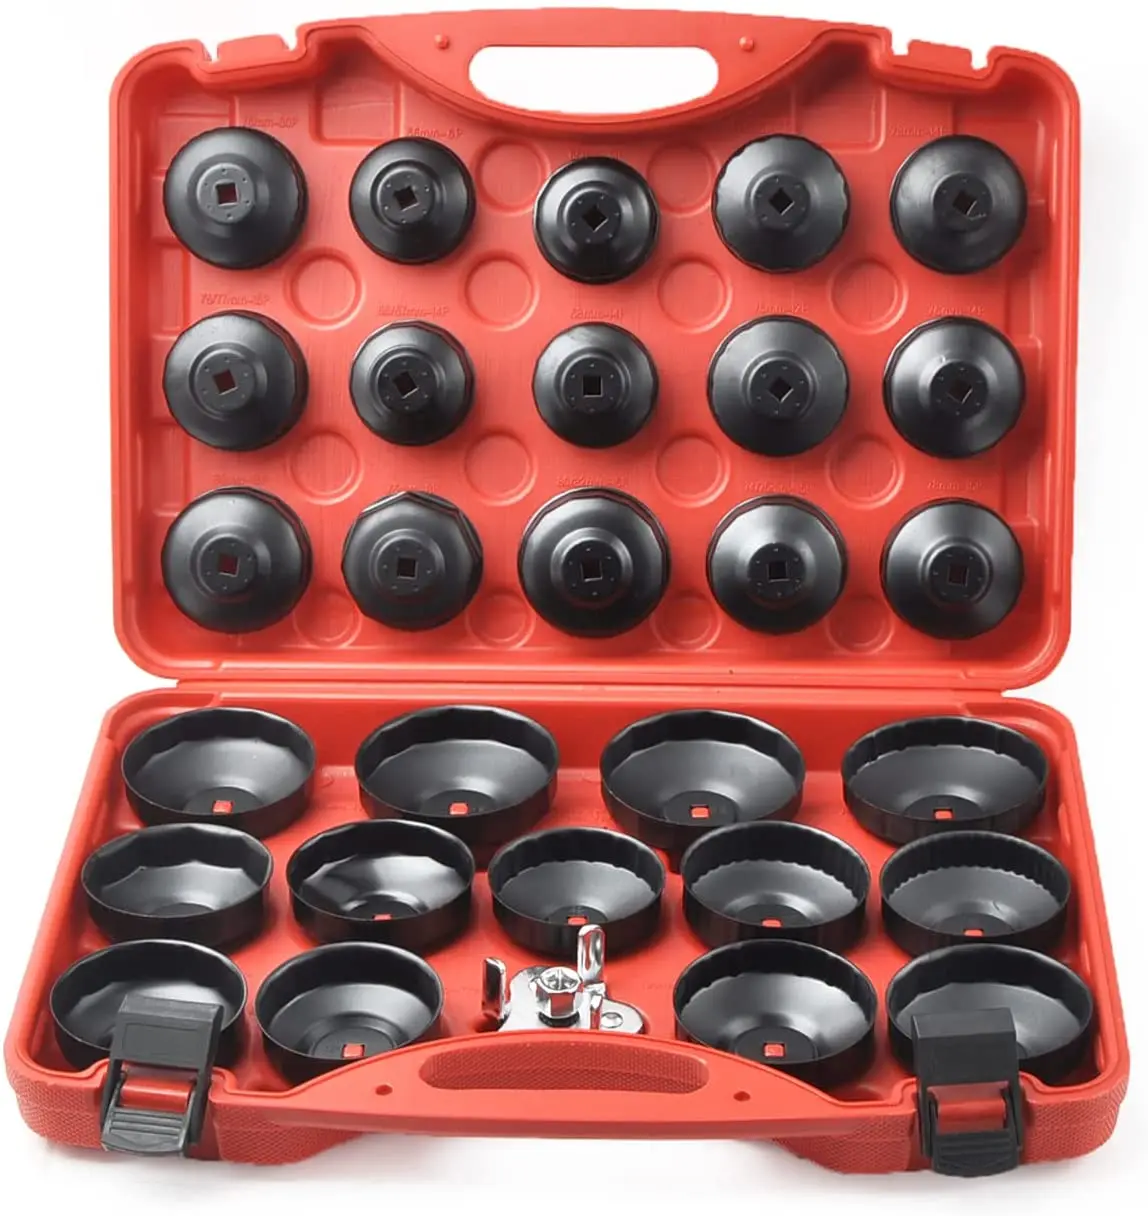 Compatible for 30PCS Cup Type Oil Filter Wrench Set Socket Tool Set for Mercedes BMW VW Audi Volvo Ford